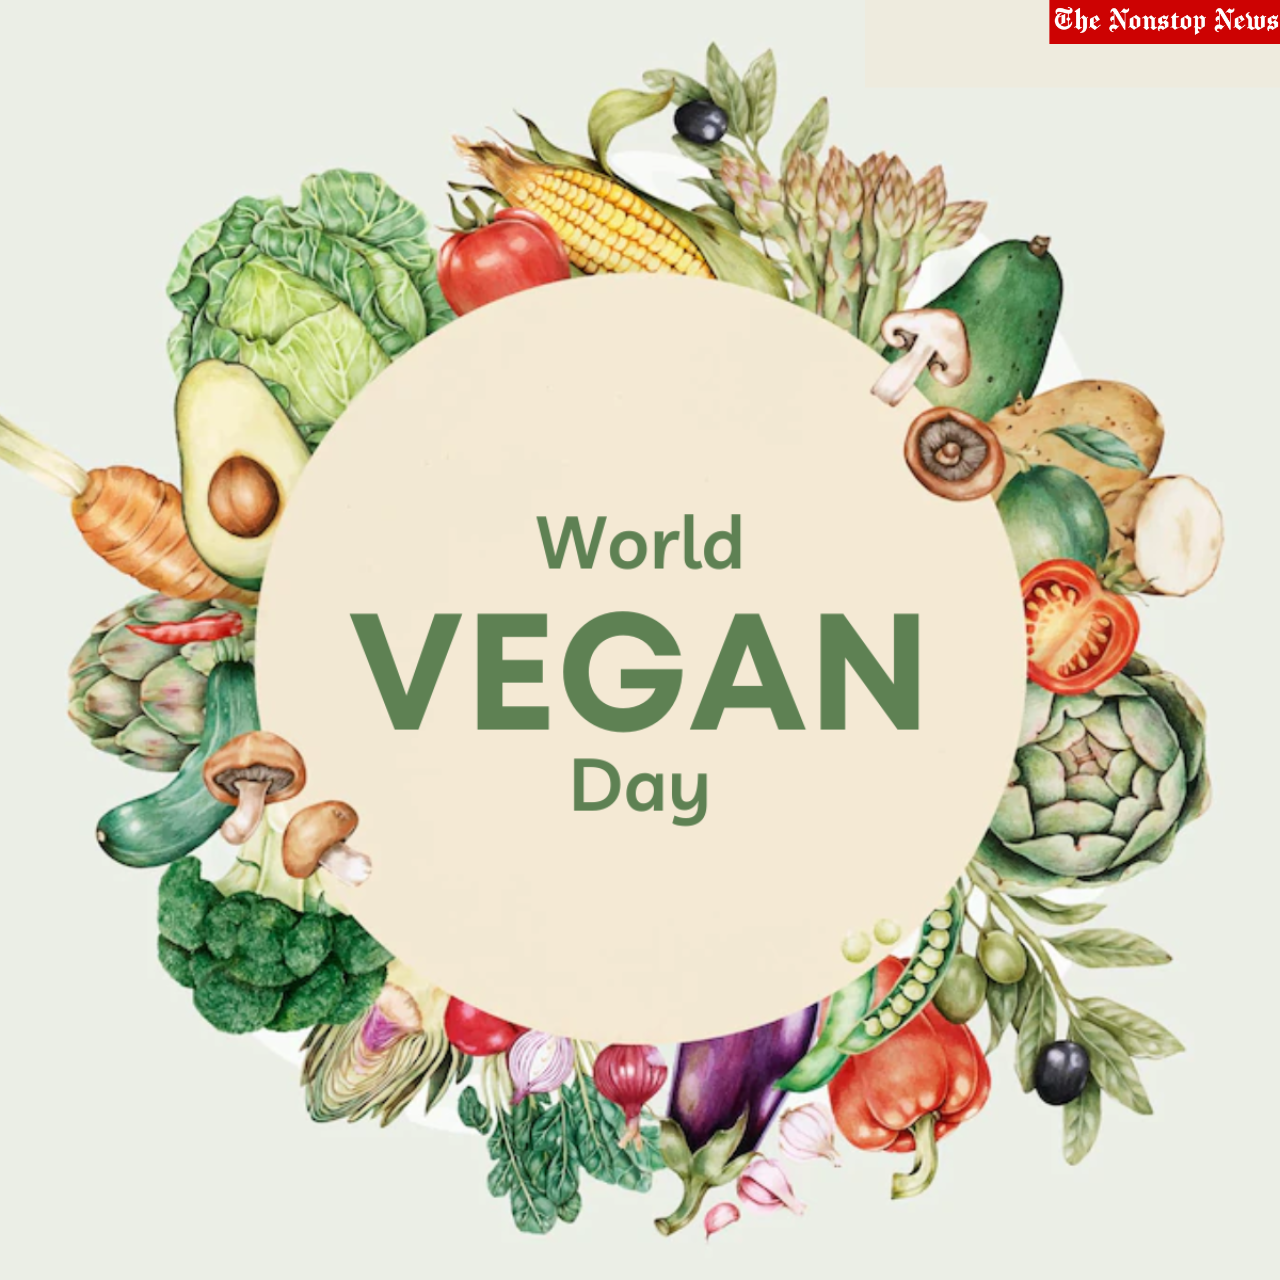 World Vegan Day 2022 Wishes, Quotes, HD Images, Posters, Messages, Slogans, and Banners